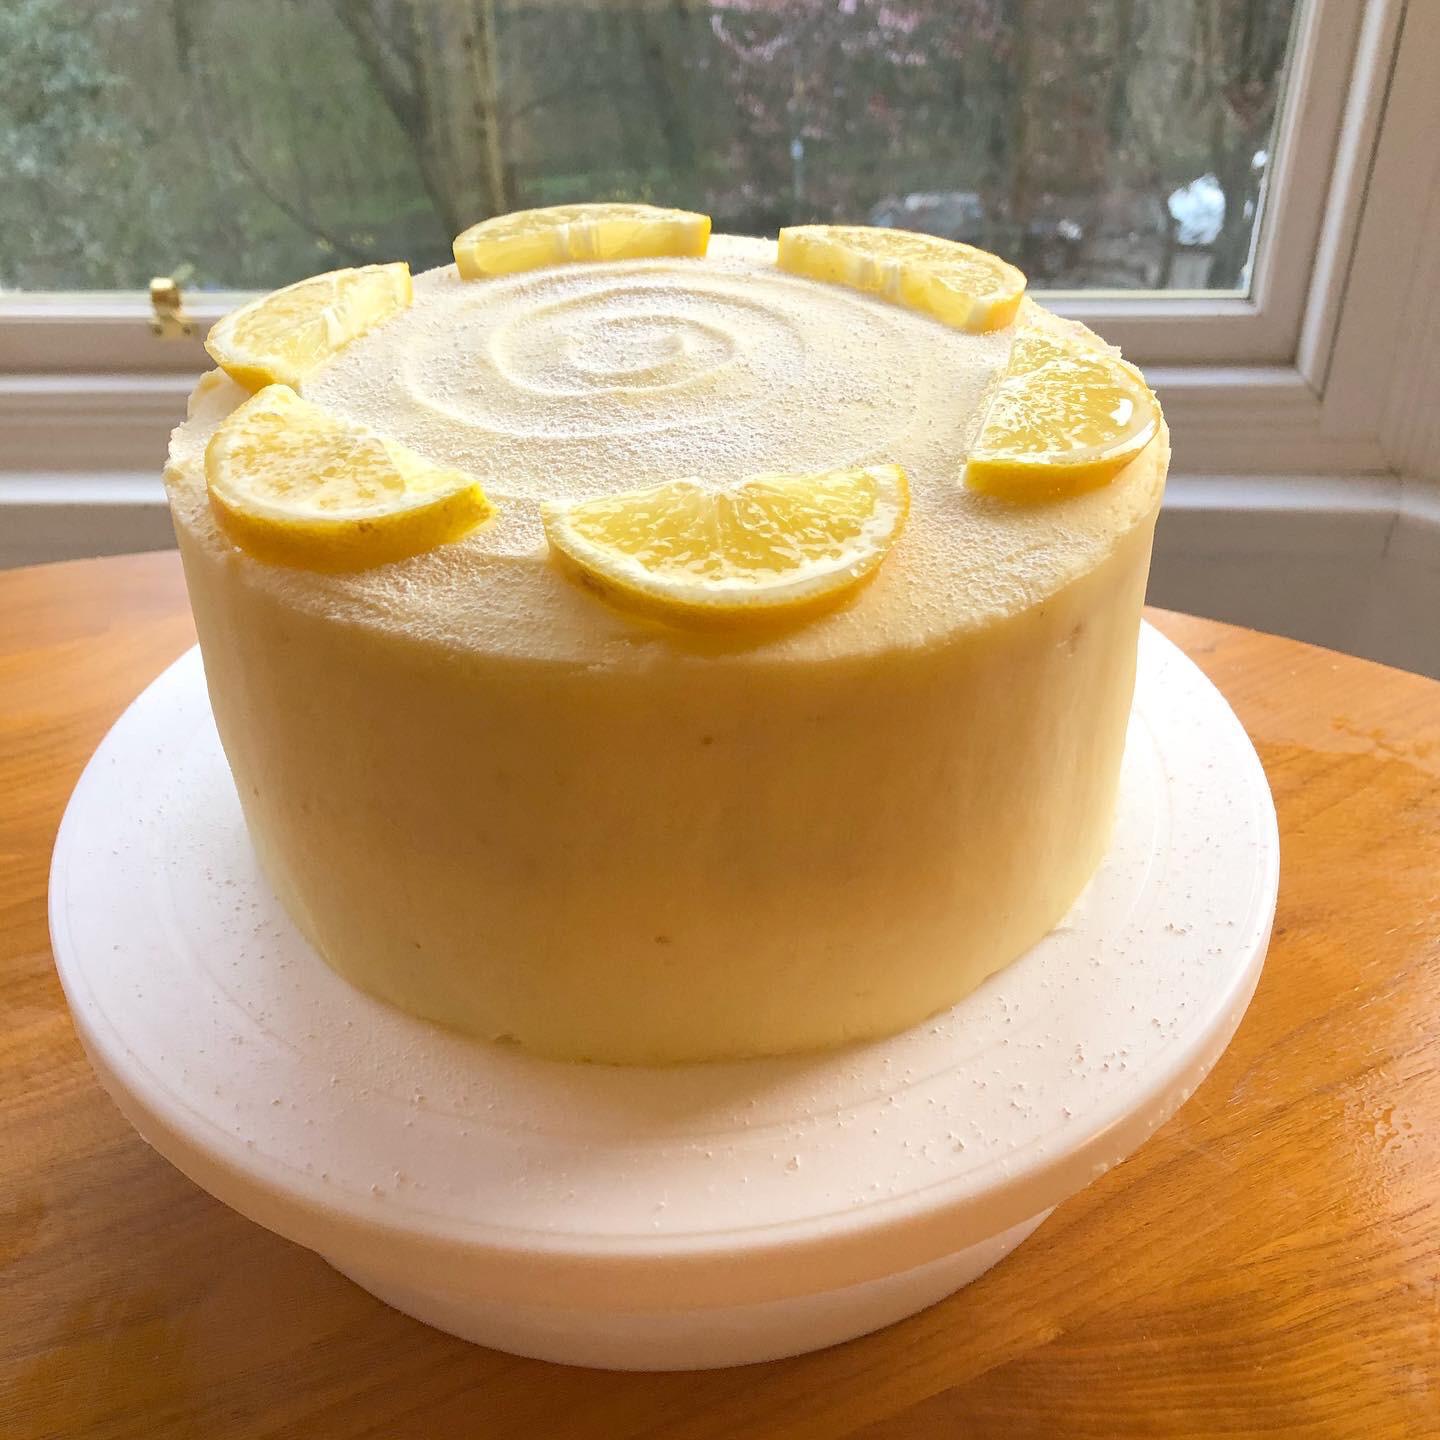 [Homemade] lemon cake with passionfruit and lemon curd and shortbread bases to each sponge.